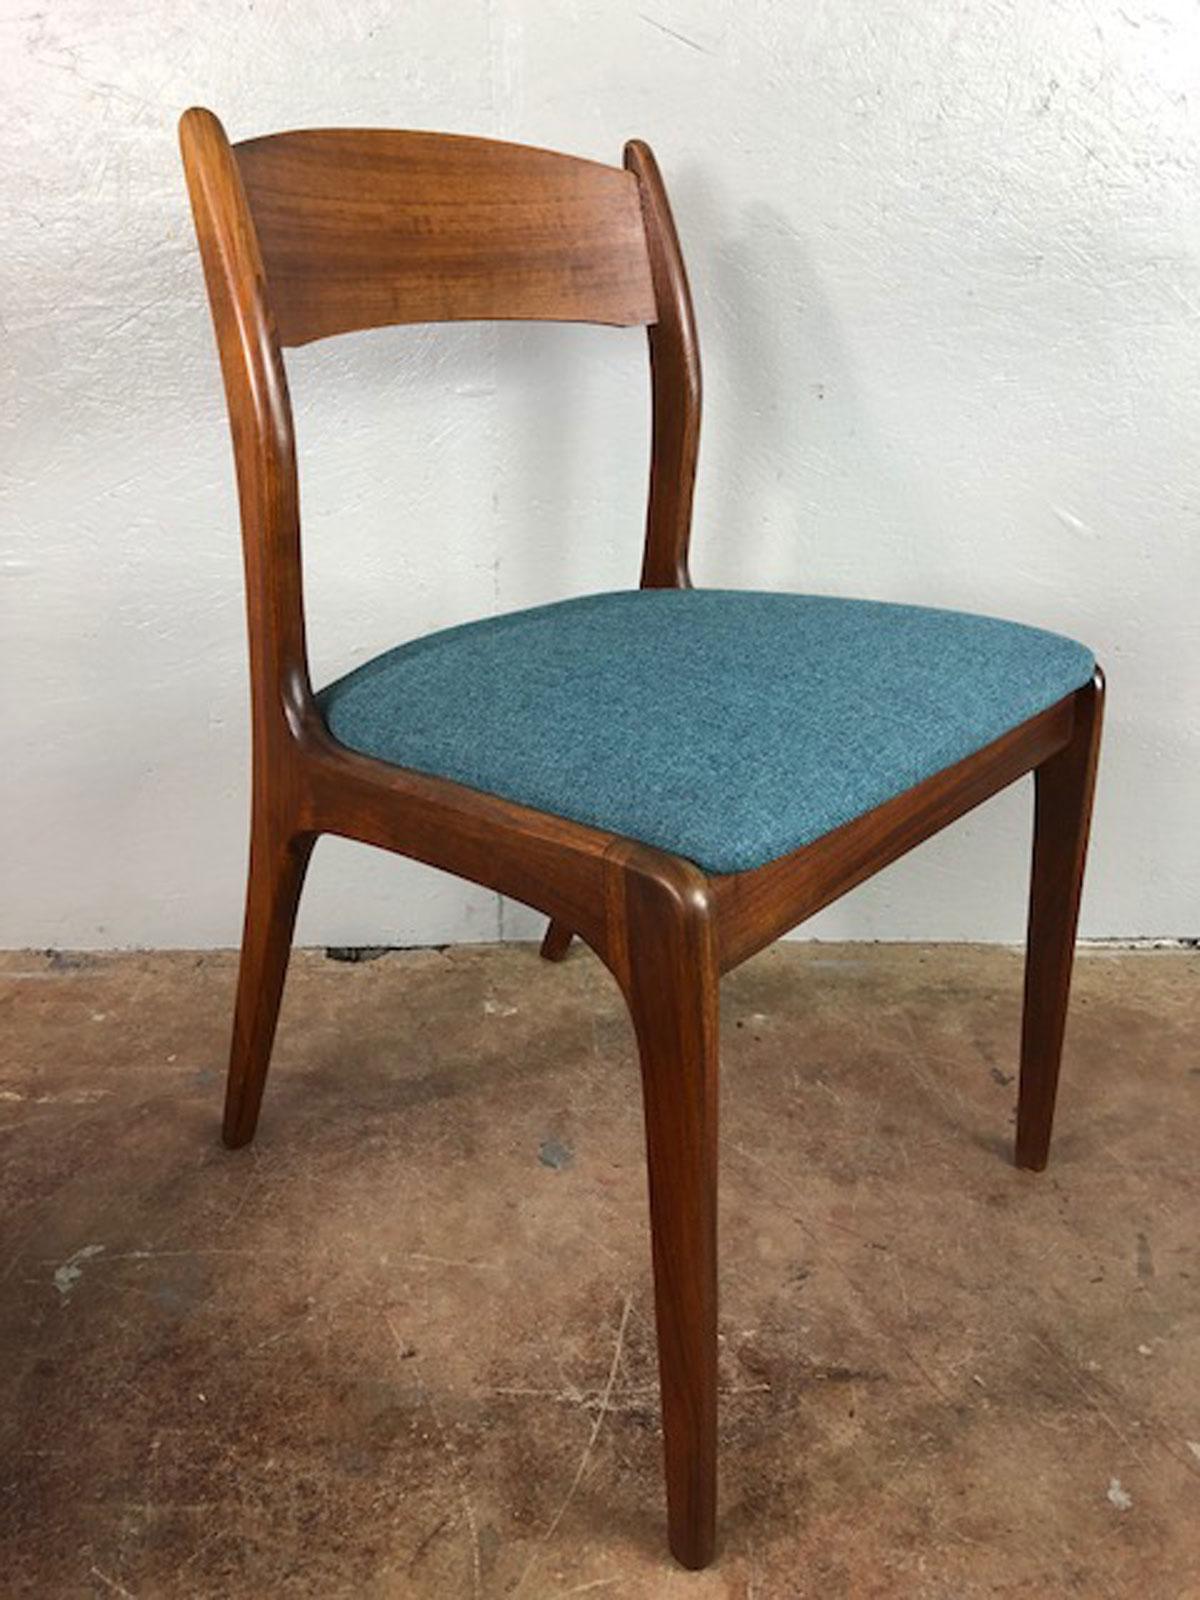 This set of four walnut dining chairs are attributed to J.L.Moller. Newly upholstered, circa 1960s. Very nice set. Rich and elegant.